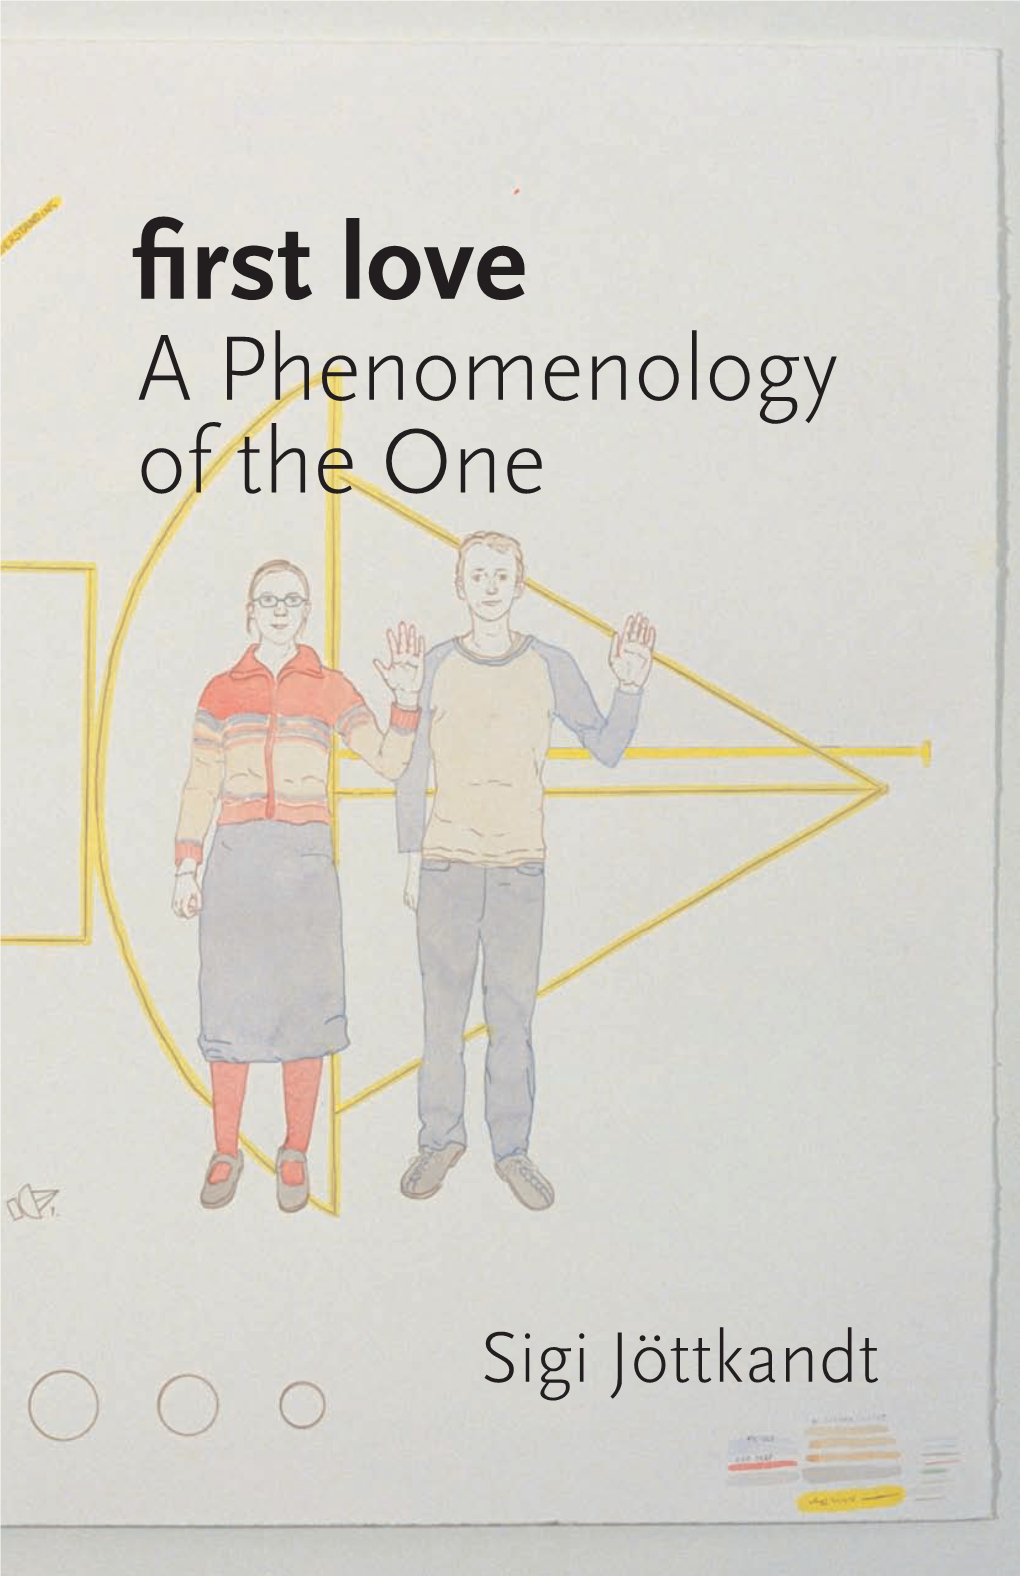 First Love a Phenomenology First Love:First of the One a Phenomenology of the One the of Phenomenology A